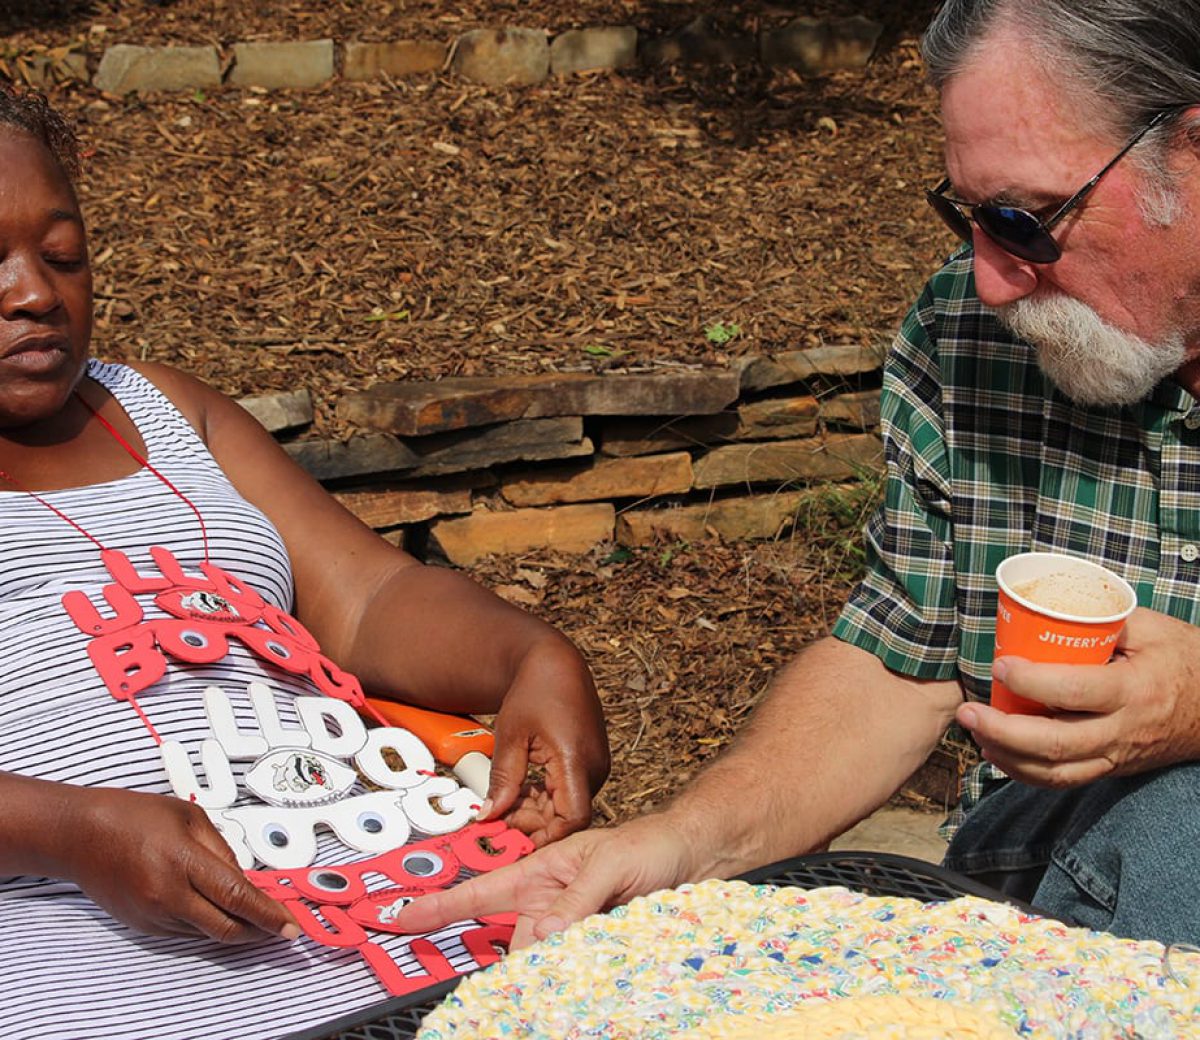 Zelma Griffith and Greg Wagstaff discuss Griffith’s rag rugs and her other crafts at Jittery Joe’s on Baxter Street in Athens, Ga. on Sept. 28, 2018. Wagstaff gave Griffith the idea to start making rag rugs. “I’m gonna tell you about my friend right here, he the one who got me hooked on making these. He told me about the idea. He really pretty much just throw’d it out the air. But I didn’t know what I was doing at first,” Griffith stated. (Photo by Kristen Adaway)